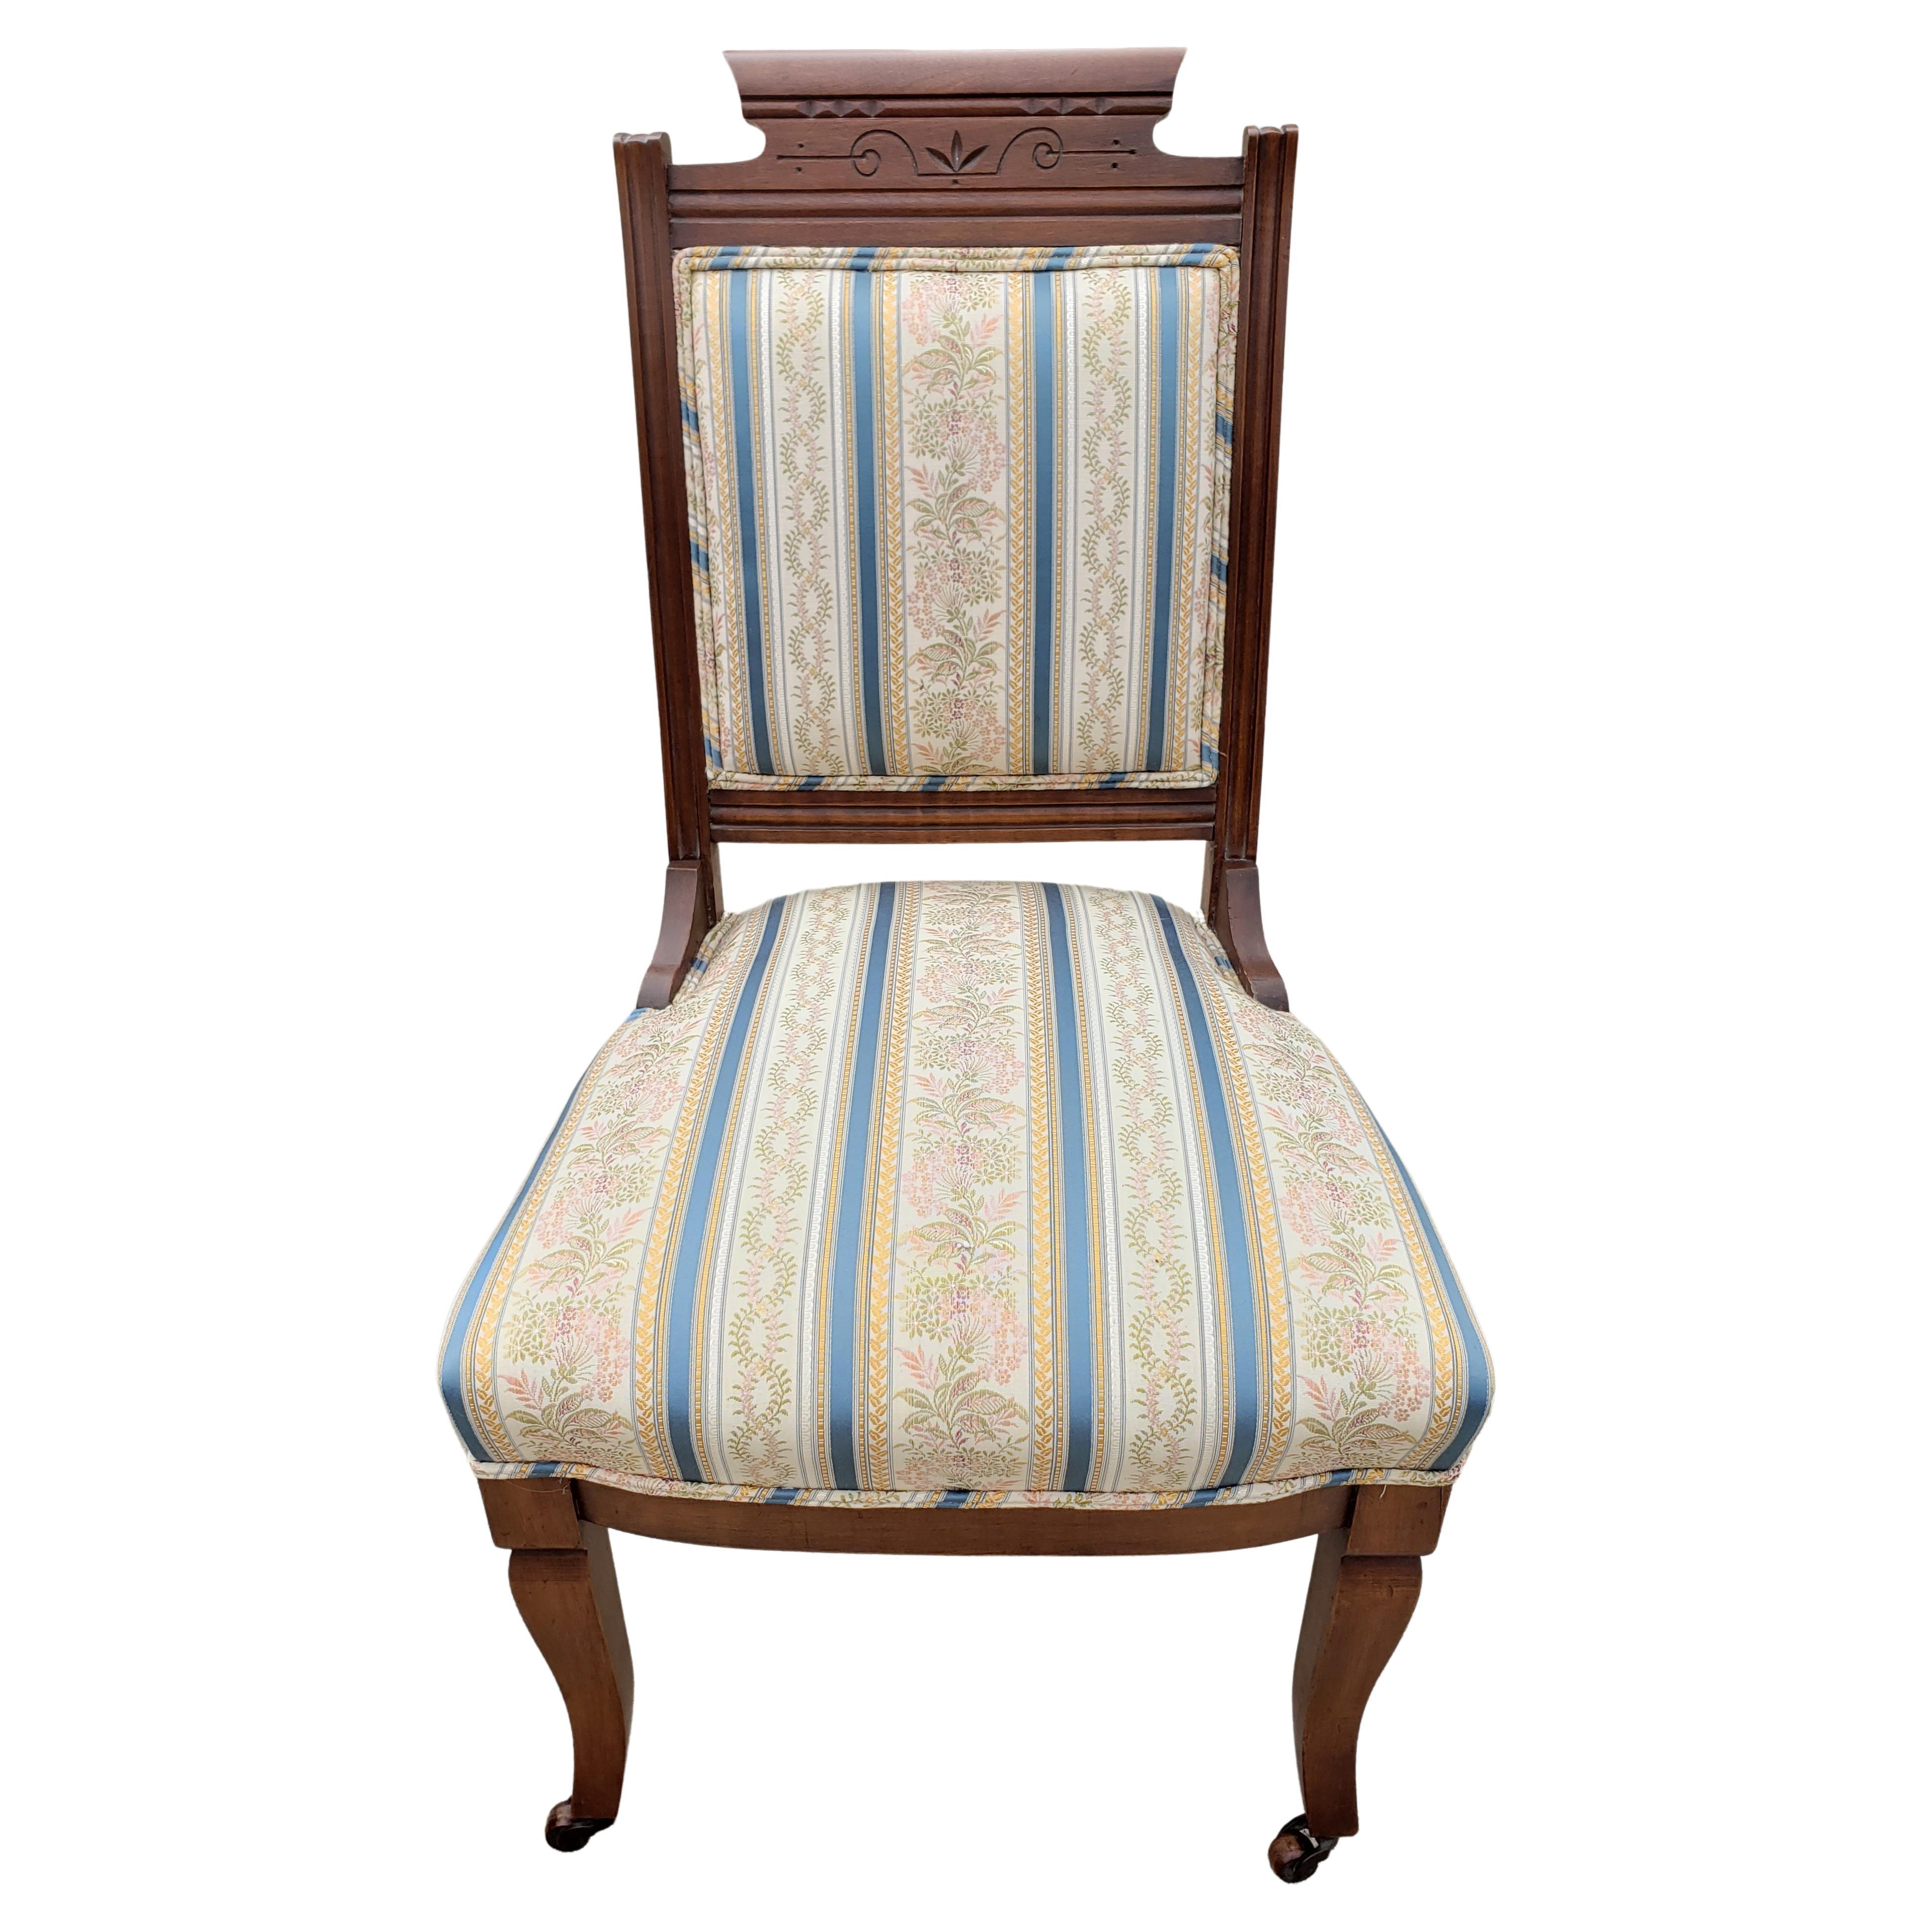 Antique Victorian Striped Upholstered Chairs, Circa 1890s For Sale